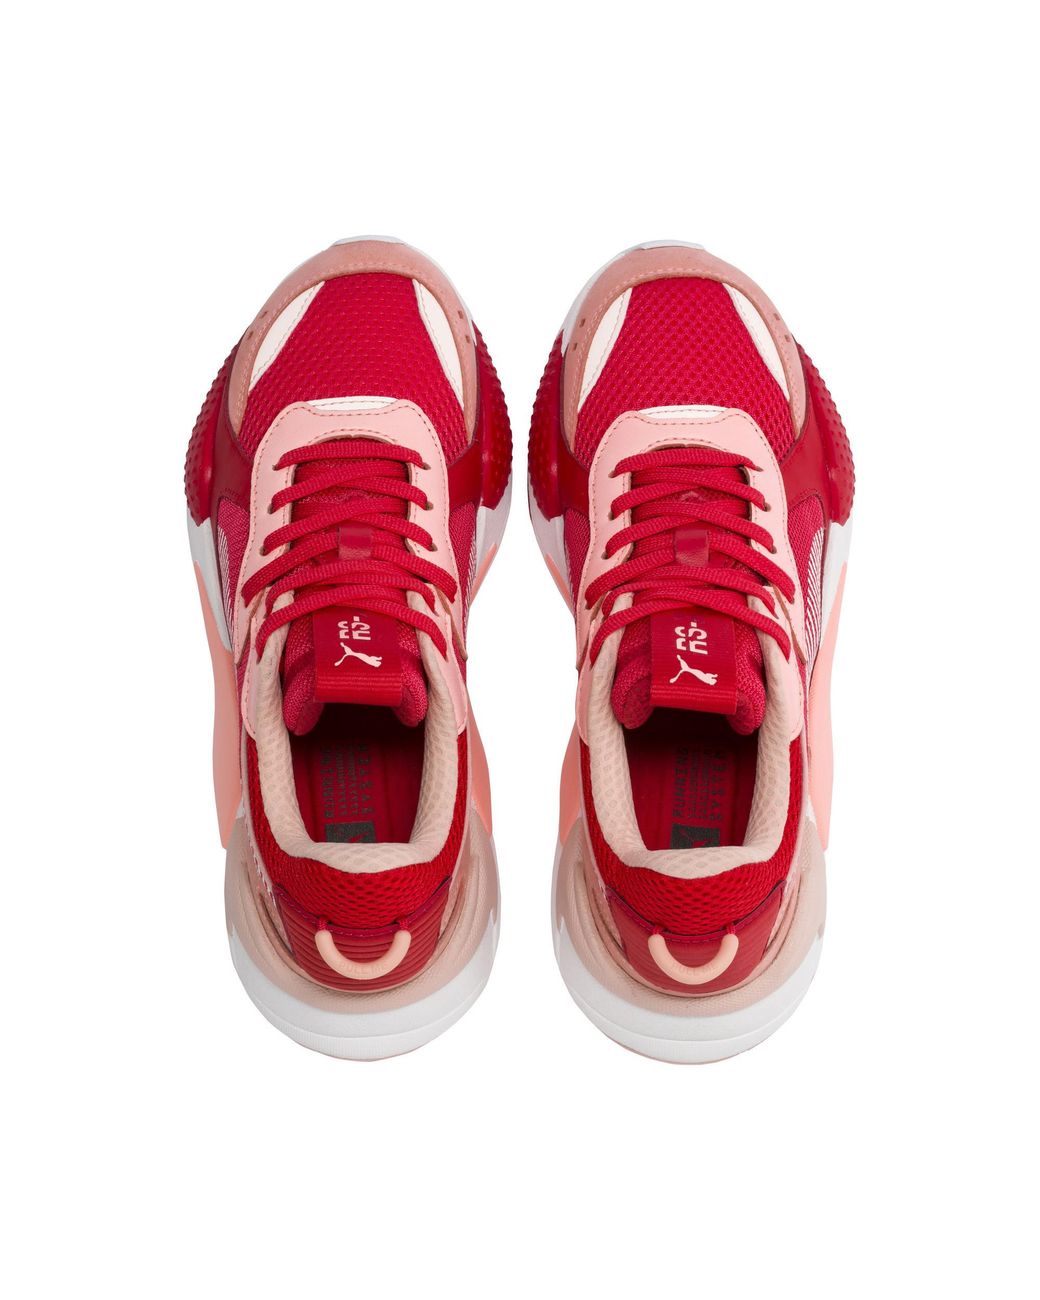 PUMA Rubber Rs-x Toys in Red | Lyst